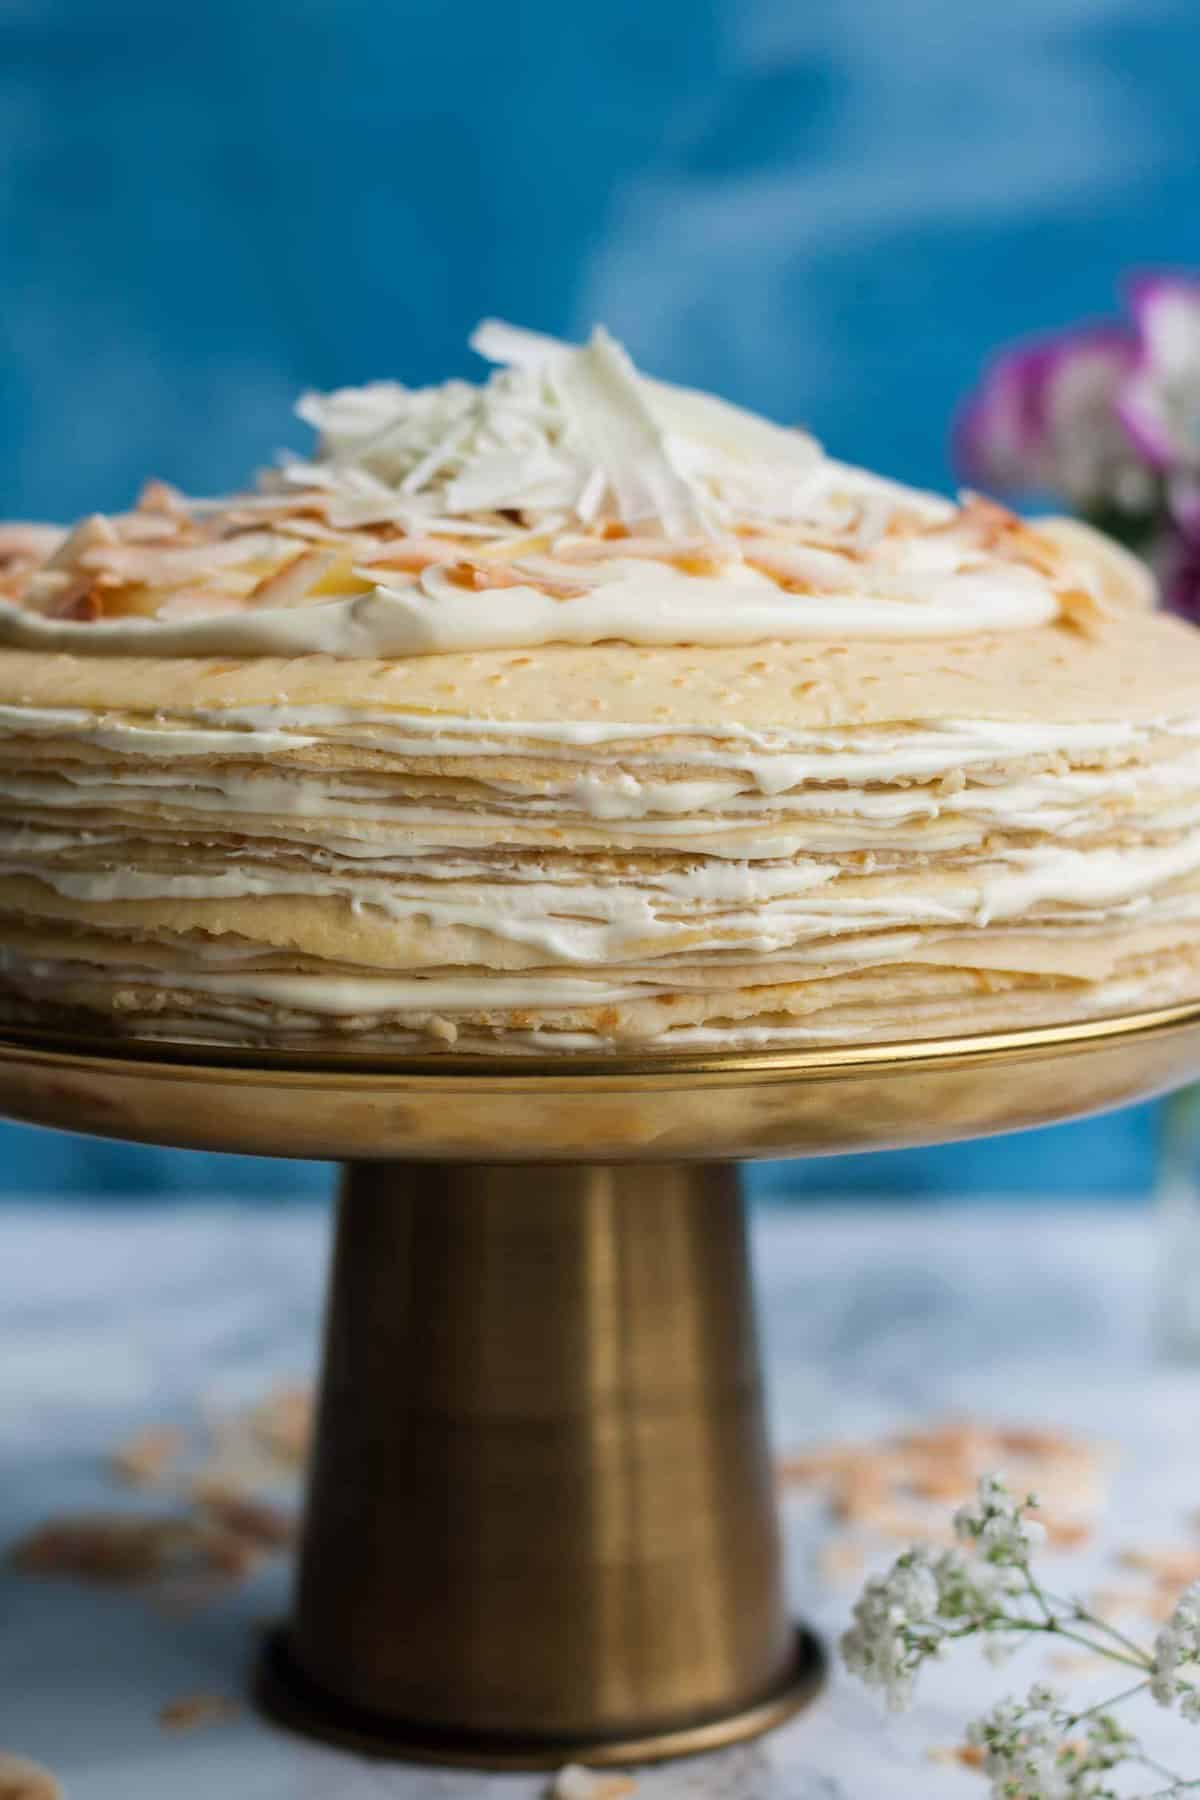 White Chocolate Lemon Curd Crepe Cake - why not try making this gorgeous mille crepe cake as a perfect showstopper centrepiece for Pancake Day or any celebration you can think of! | eatloveeats.com